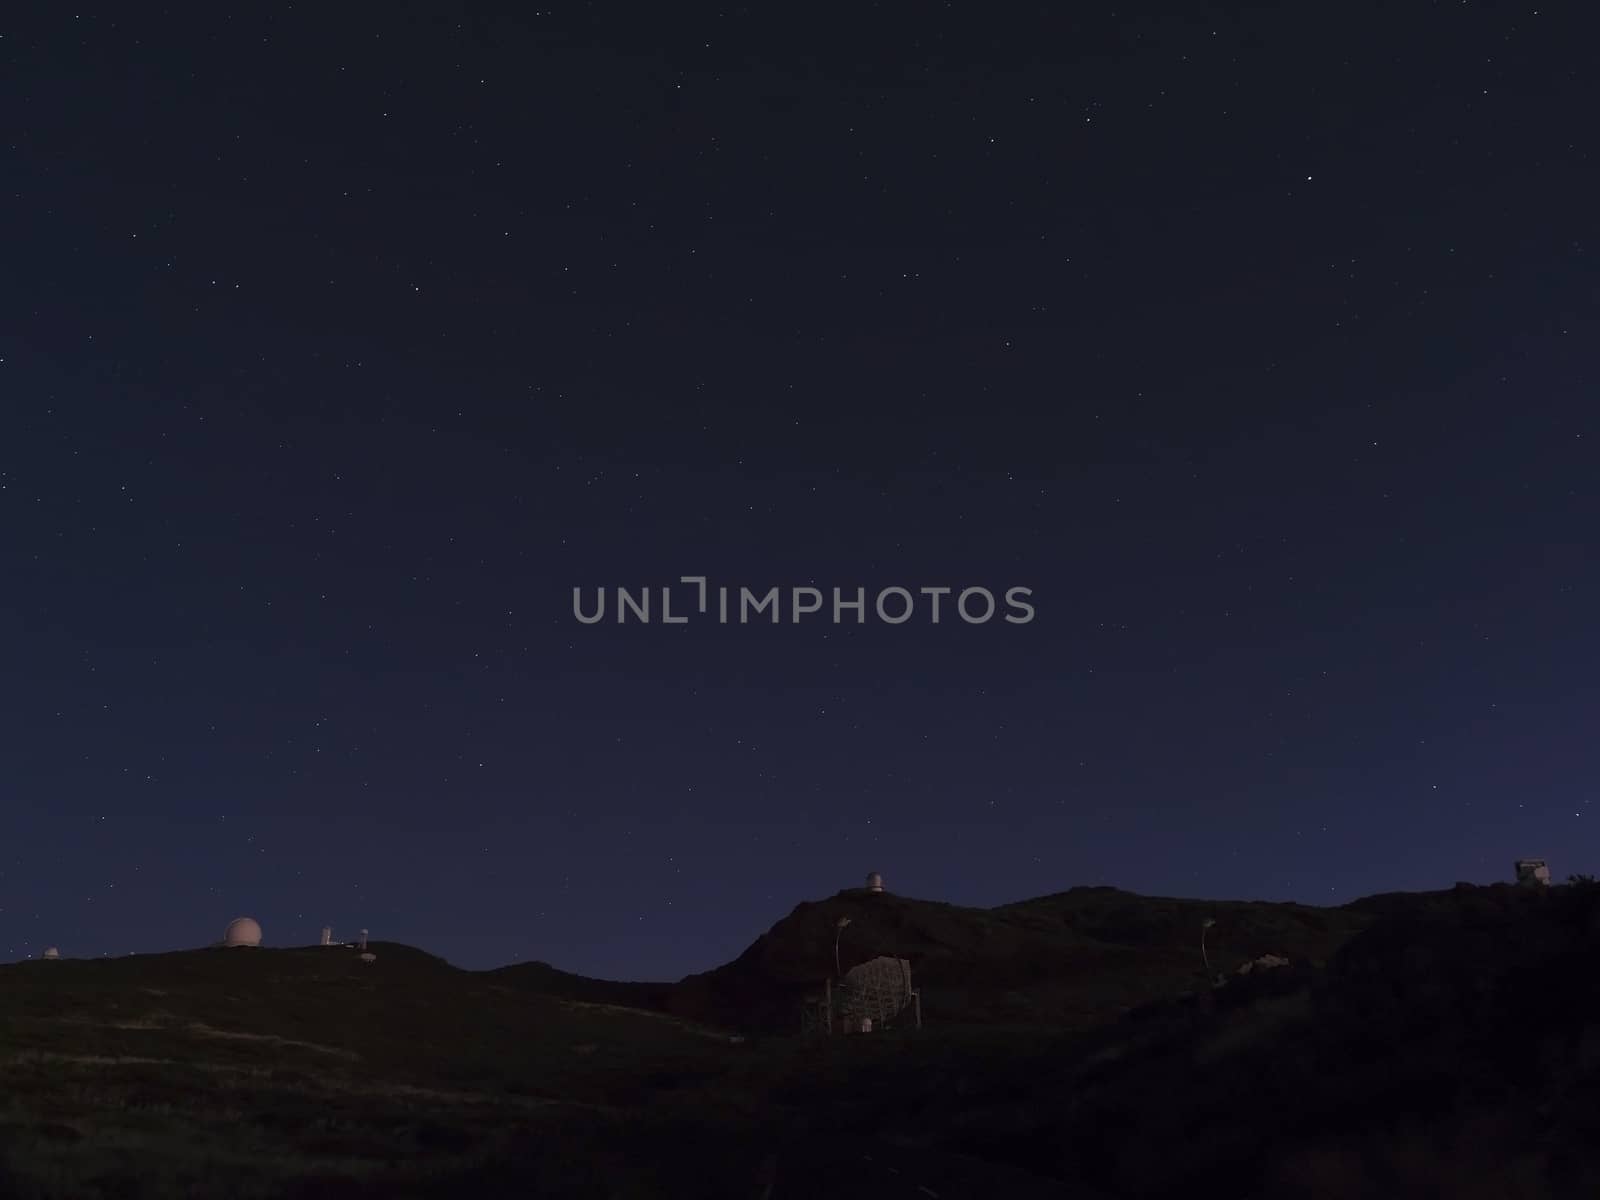 Night astrophotography, sky with stars at Roque de los Muchachos with telescopes of astronomical observatory, la Palma, Canary islands, Spain by Henkeova